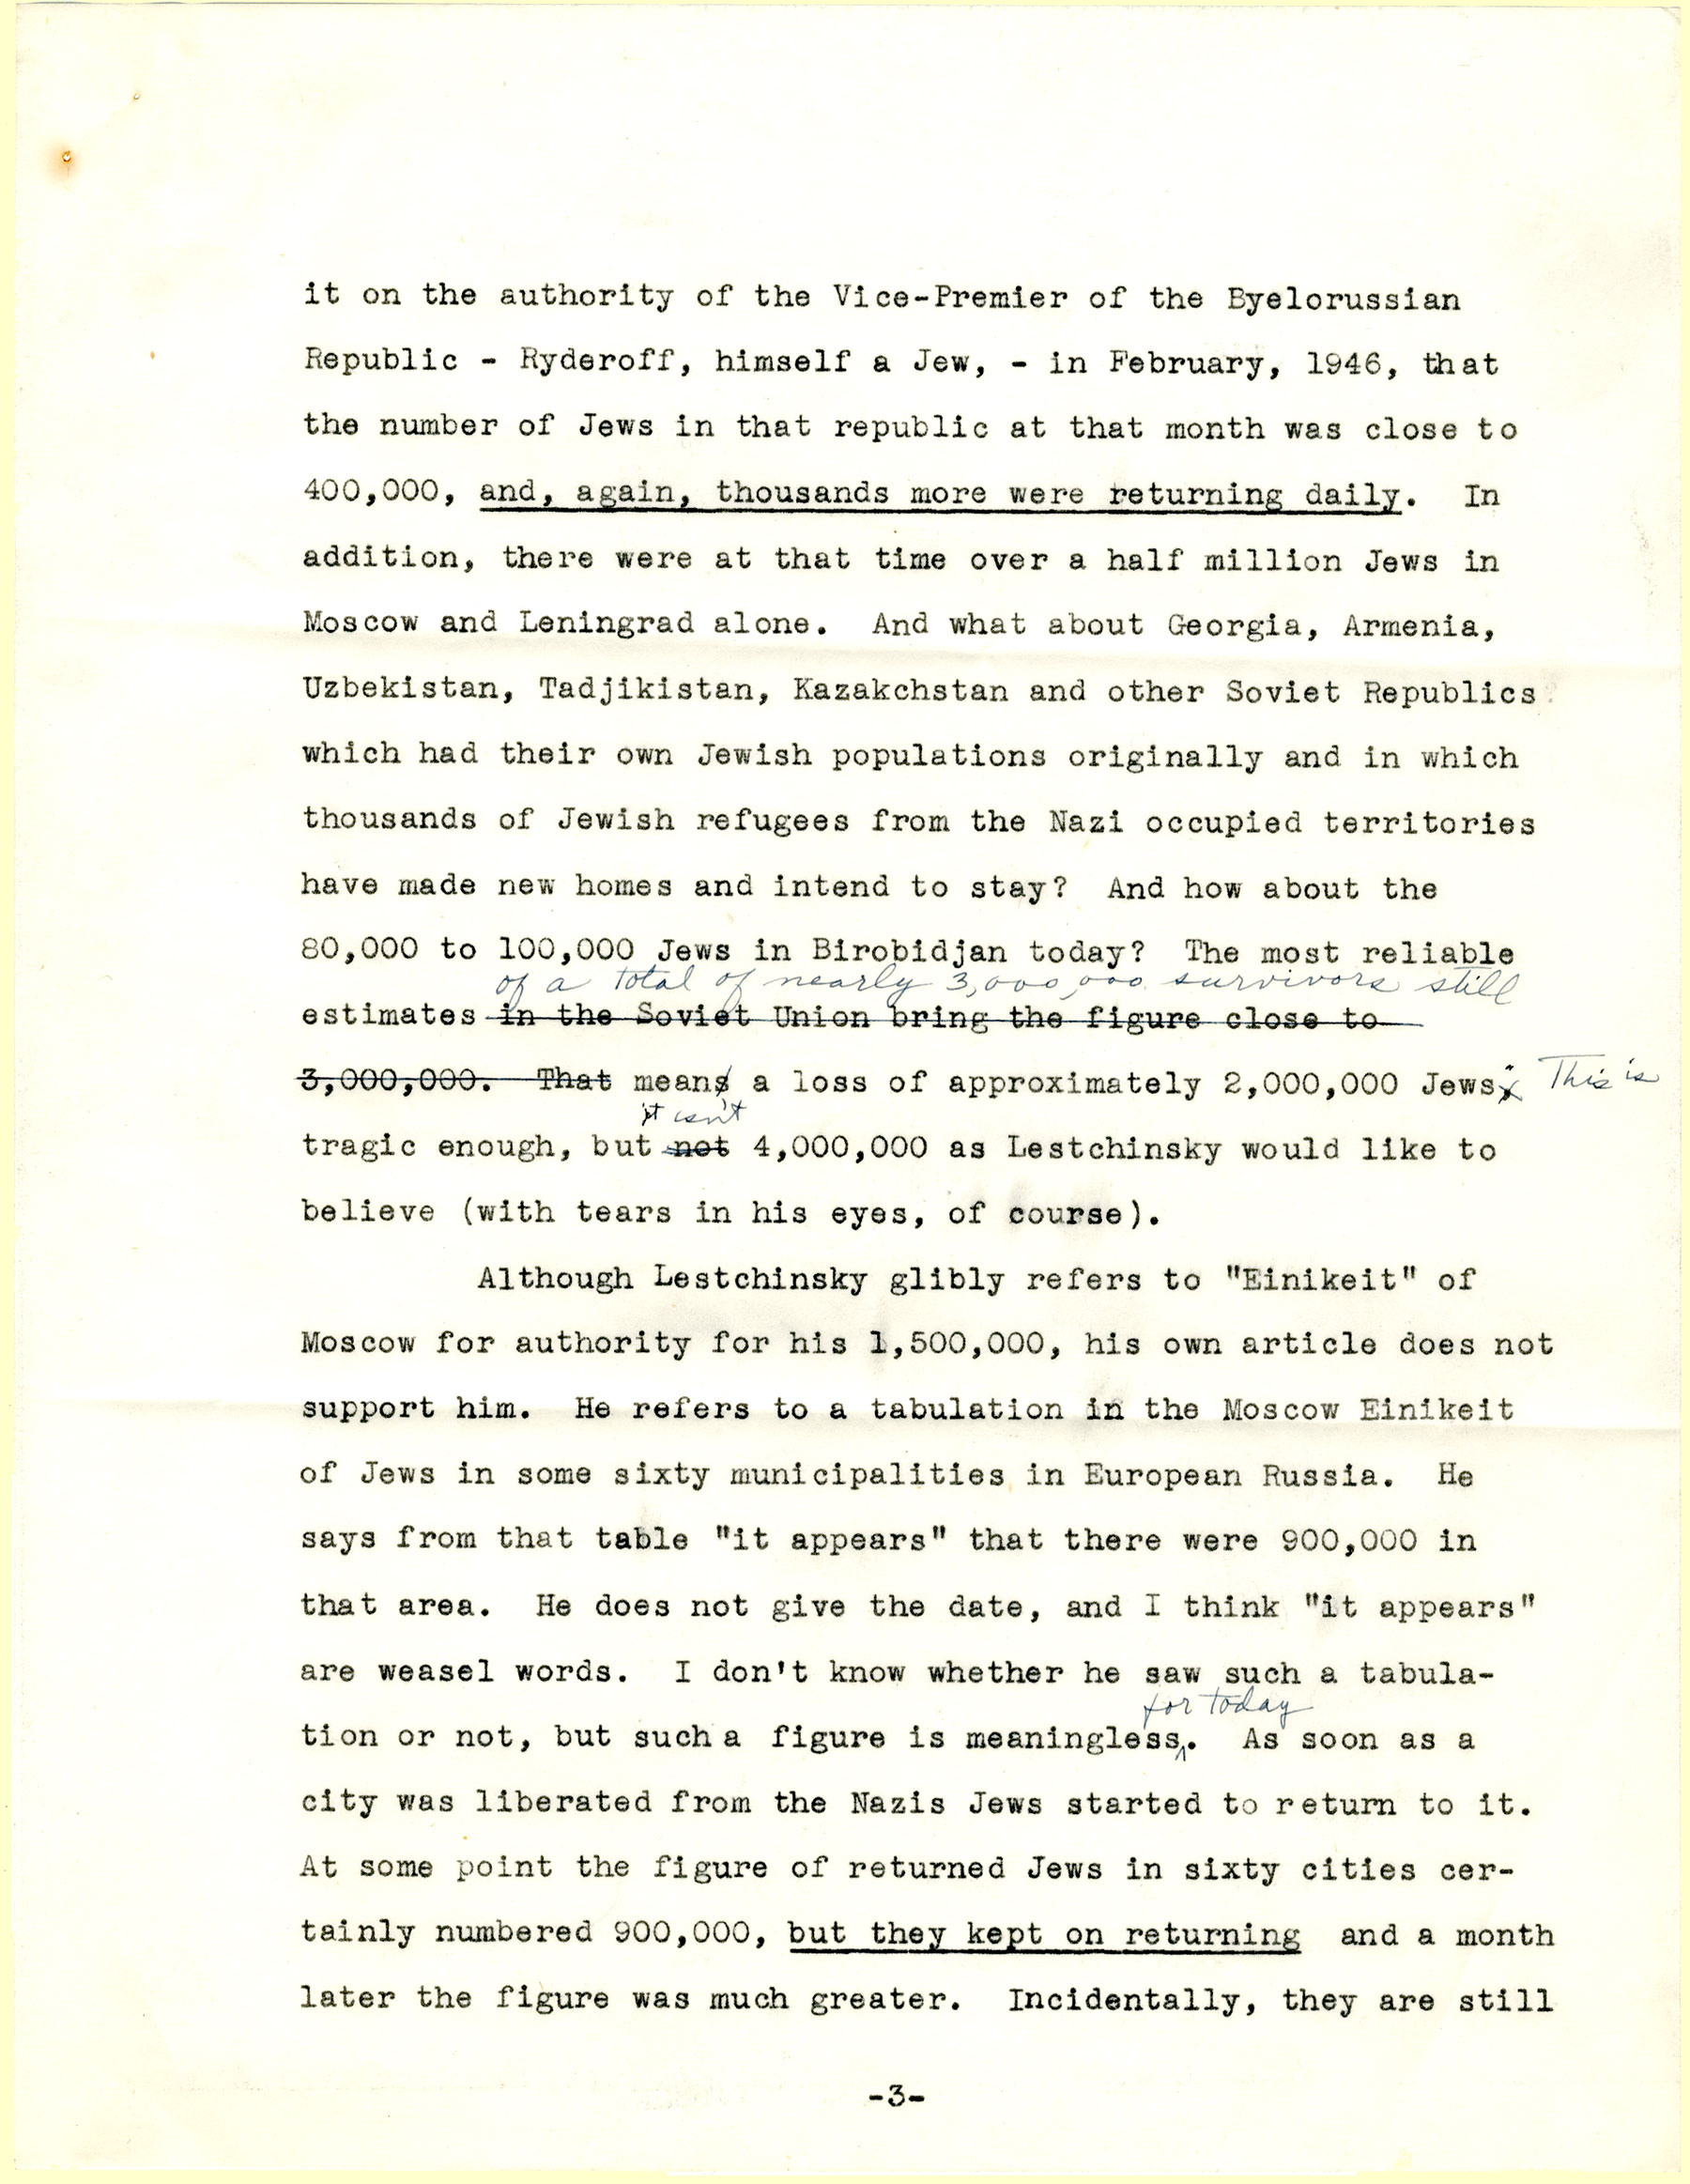 B.Z. Goldberg's letter to The New Palestine, page 3